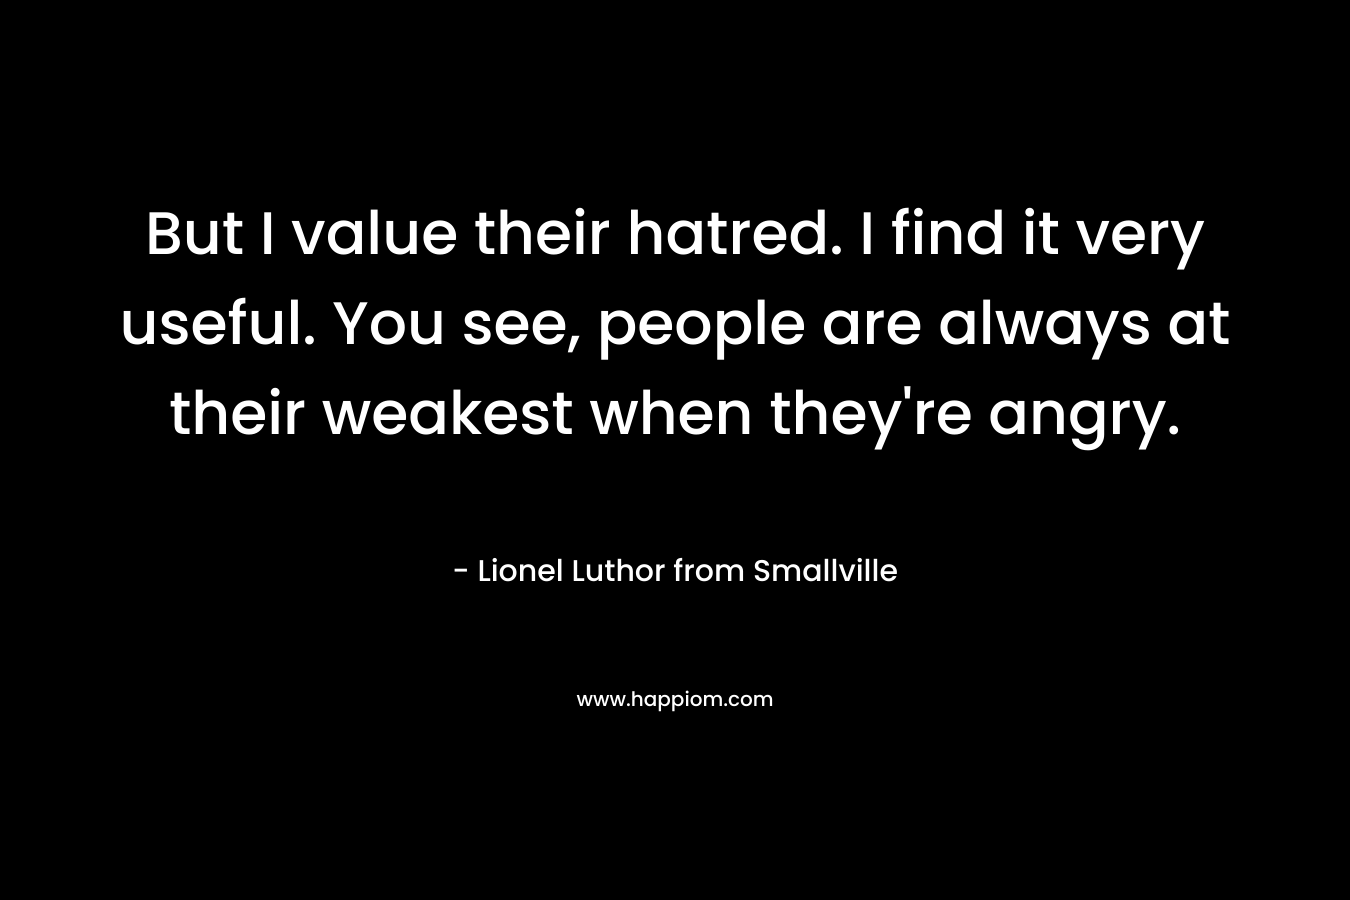 But I value their hatred. I find it very useful. You see, people are always at their weakest when they’re angry. – Lionel Luthor from Smallville